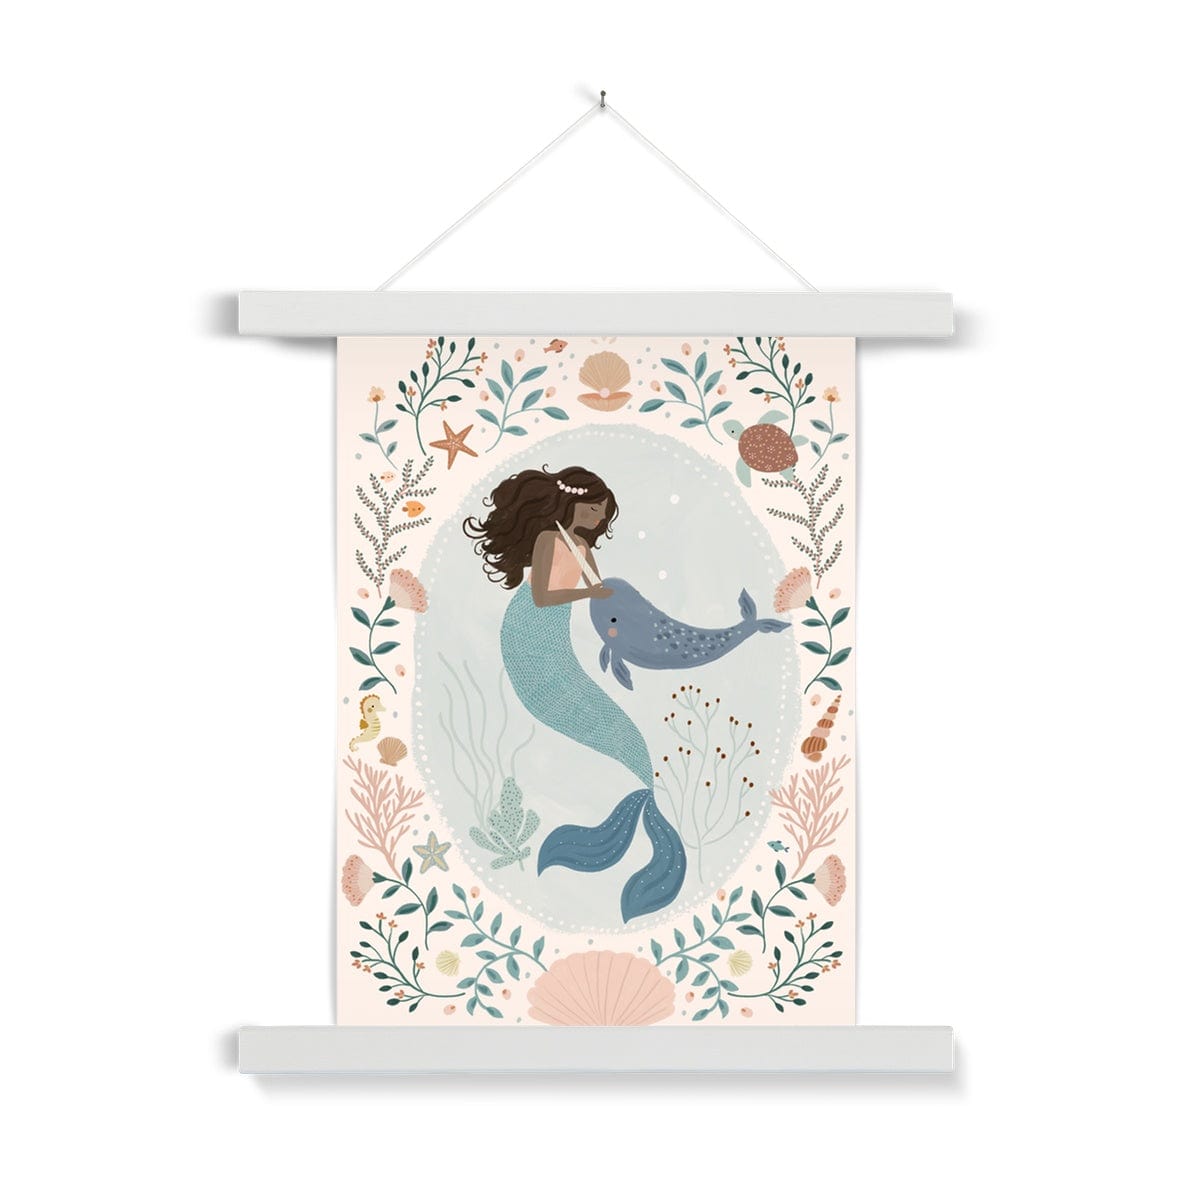 Beautiful dark skinned and haired mermaid with a pearl headband petting her friend Narwhal within a pale teal coloured oval background with white dots round the edge. On the outside of the oval is a sea themed border on a neutral background. The border consists of foliage, flowers and items you would find at the bottom of the sea, shells, turtle, sea horse with a large clam shell at the bottom, hanging from a nail in a white wooden hanger